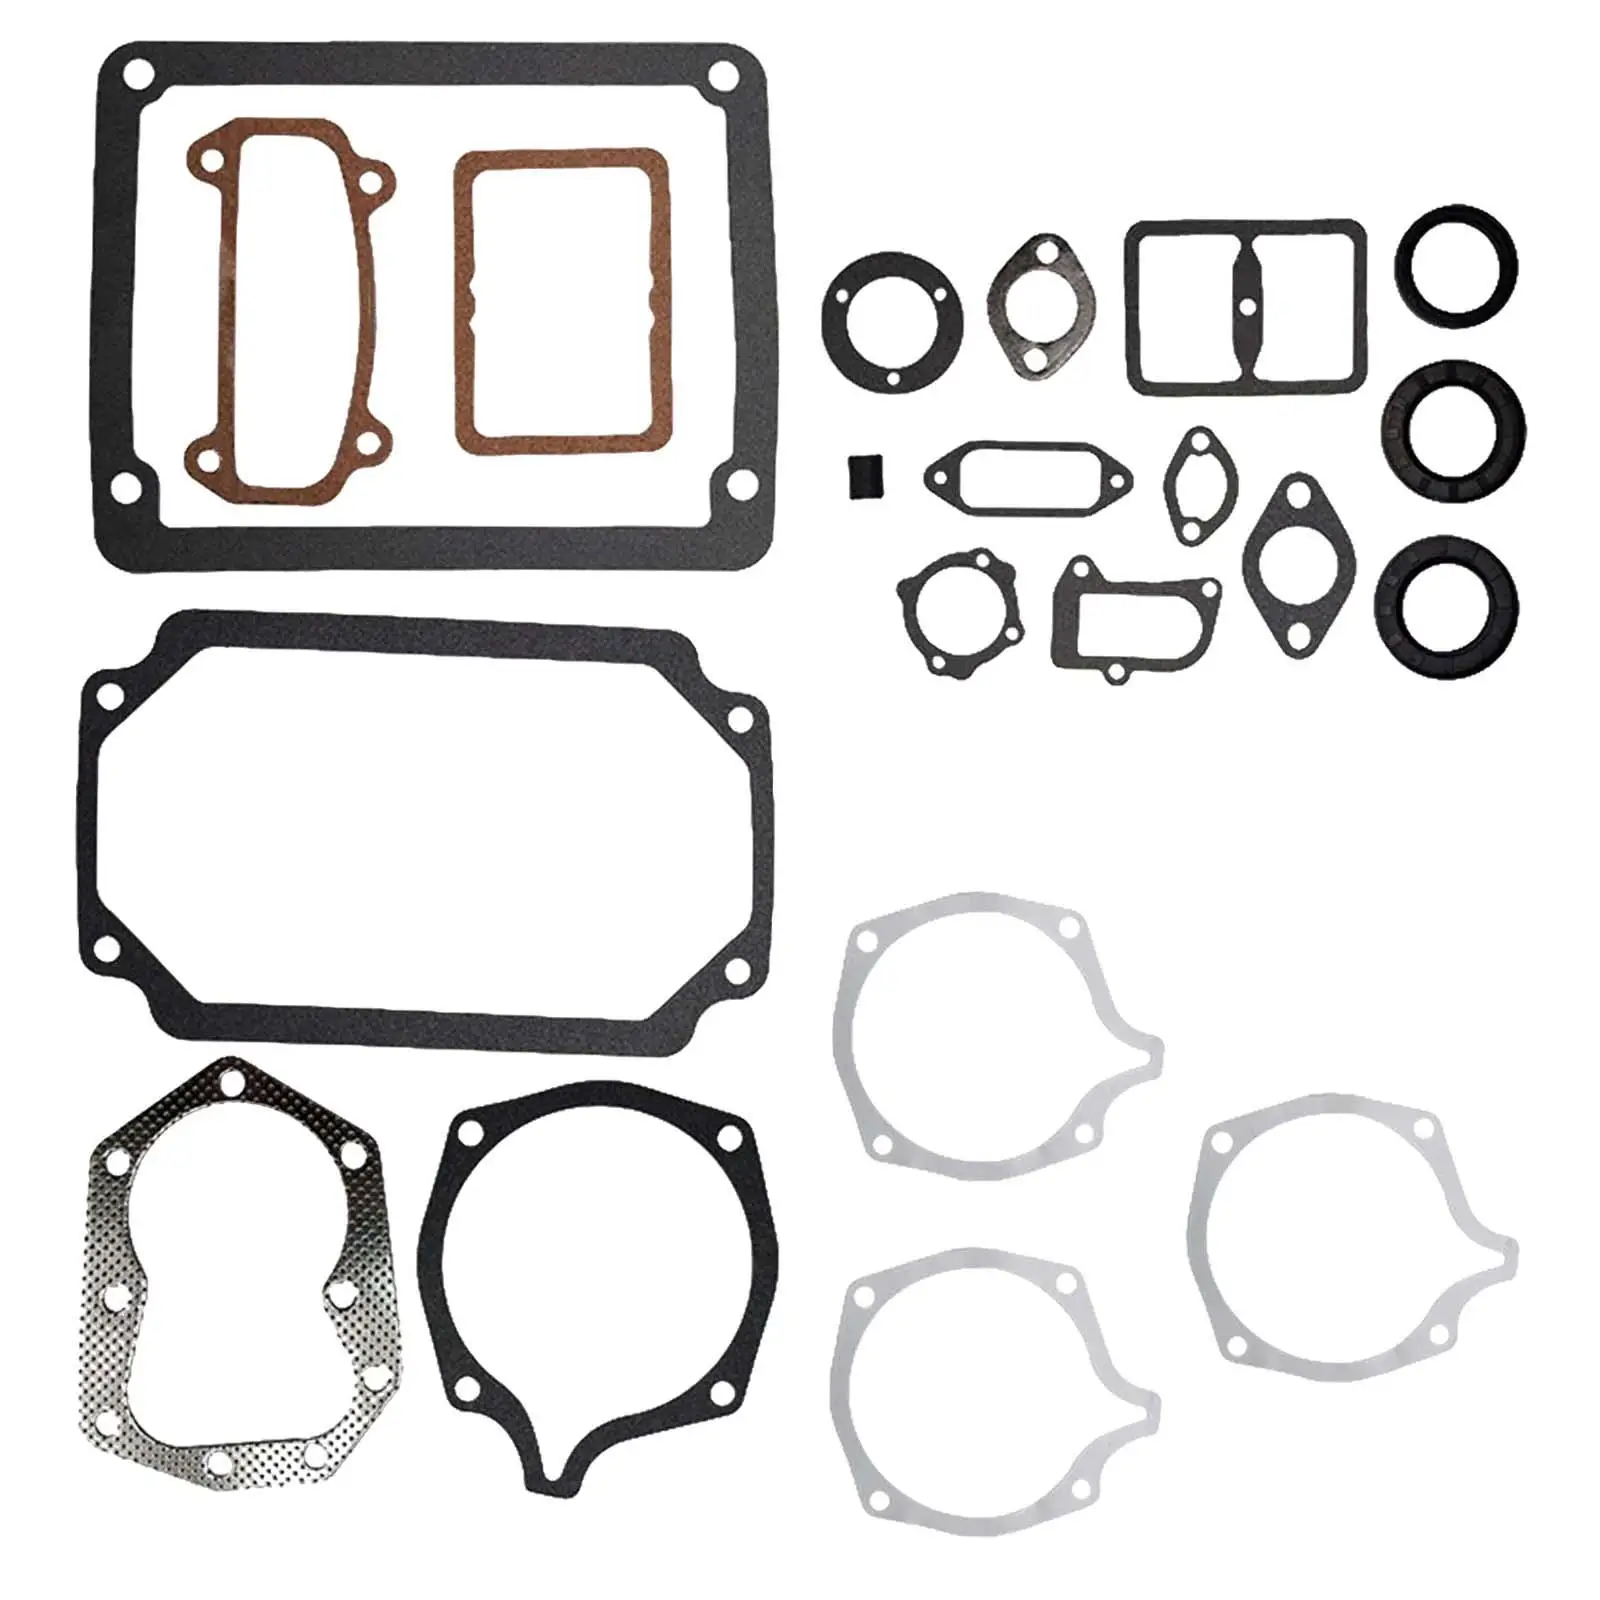 47 755 08-S Gasket Set Silver Metal and Plastic Accessories Fits for K241 K301